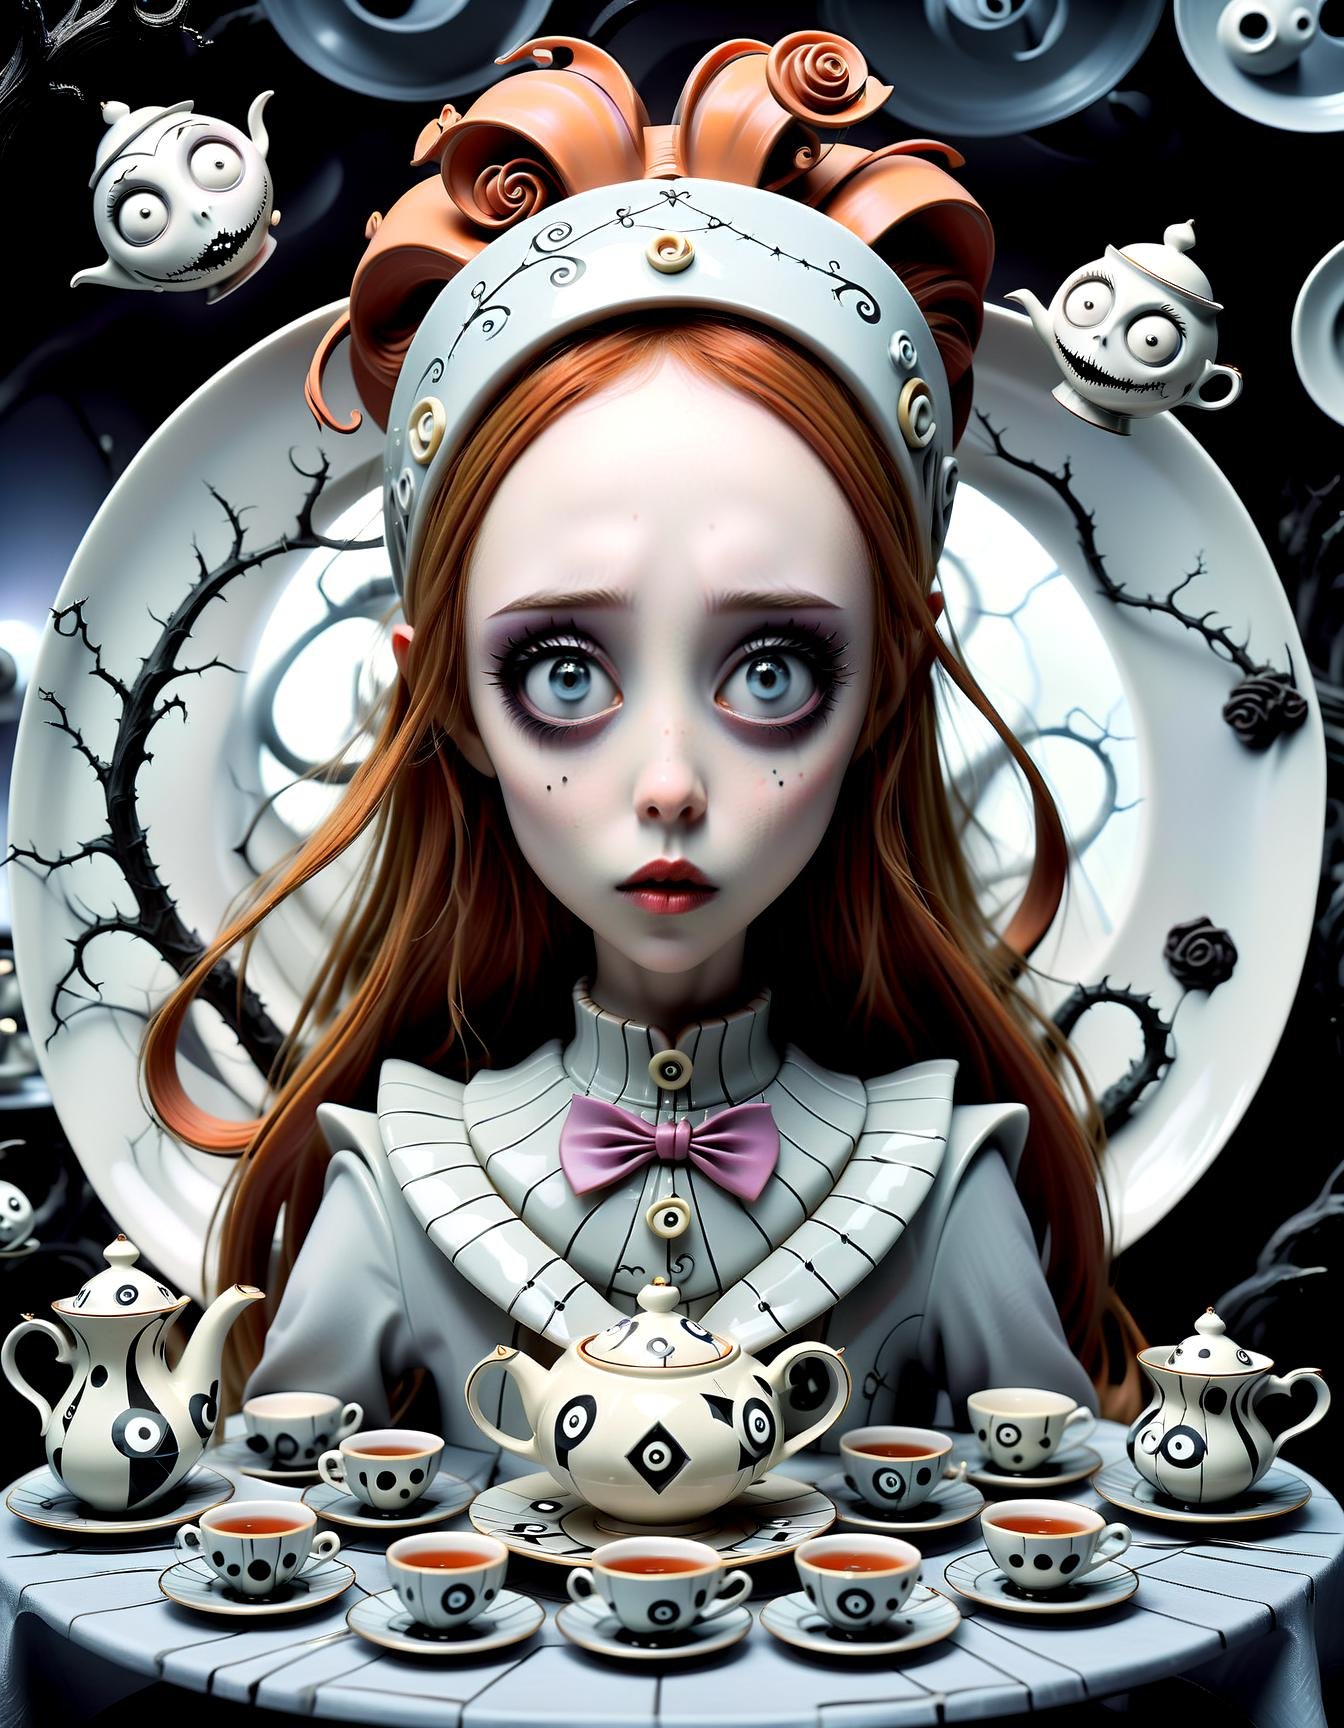 Asuna, with her ethereal anime beauty, finds herself in a Tim Burton-themed tea party. The table, set with geometrically impossible teacups and plates, becomes a stage for surreal conversations. Asuna's eyes, reflecting the peculiar geometry around her, hold a mixture of amusement and intrigue. The Mad Hatter, wearing a coat adorned with anime-style illustrations, pours tea from a teapot shaped like a Möbius strip. It's a whimsical blend of anime magic and Burtonesque madness, where reality bends and fantasy takes flight.,(hand drawn with pencil:1.15), (tim burton style:1.27), ,